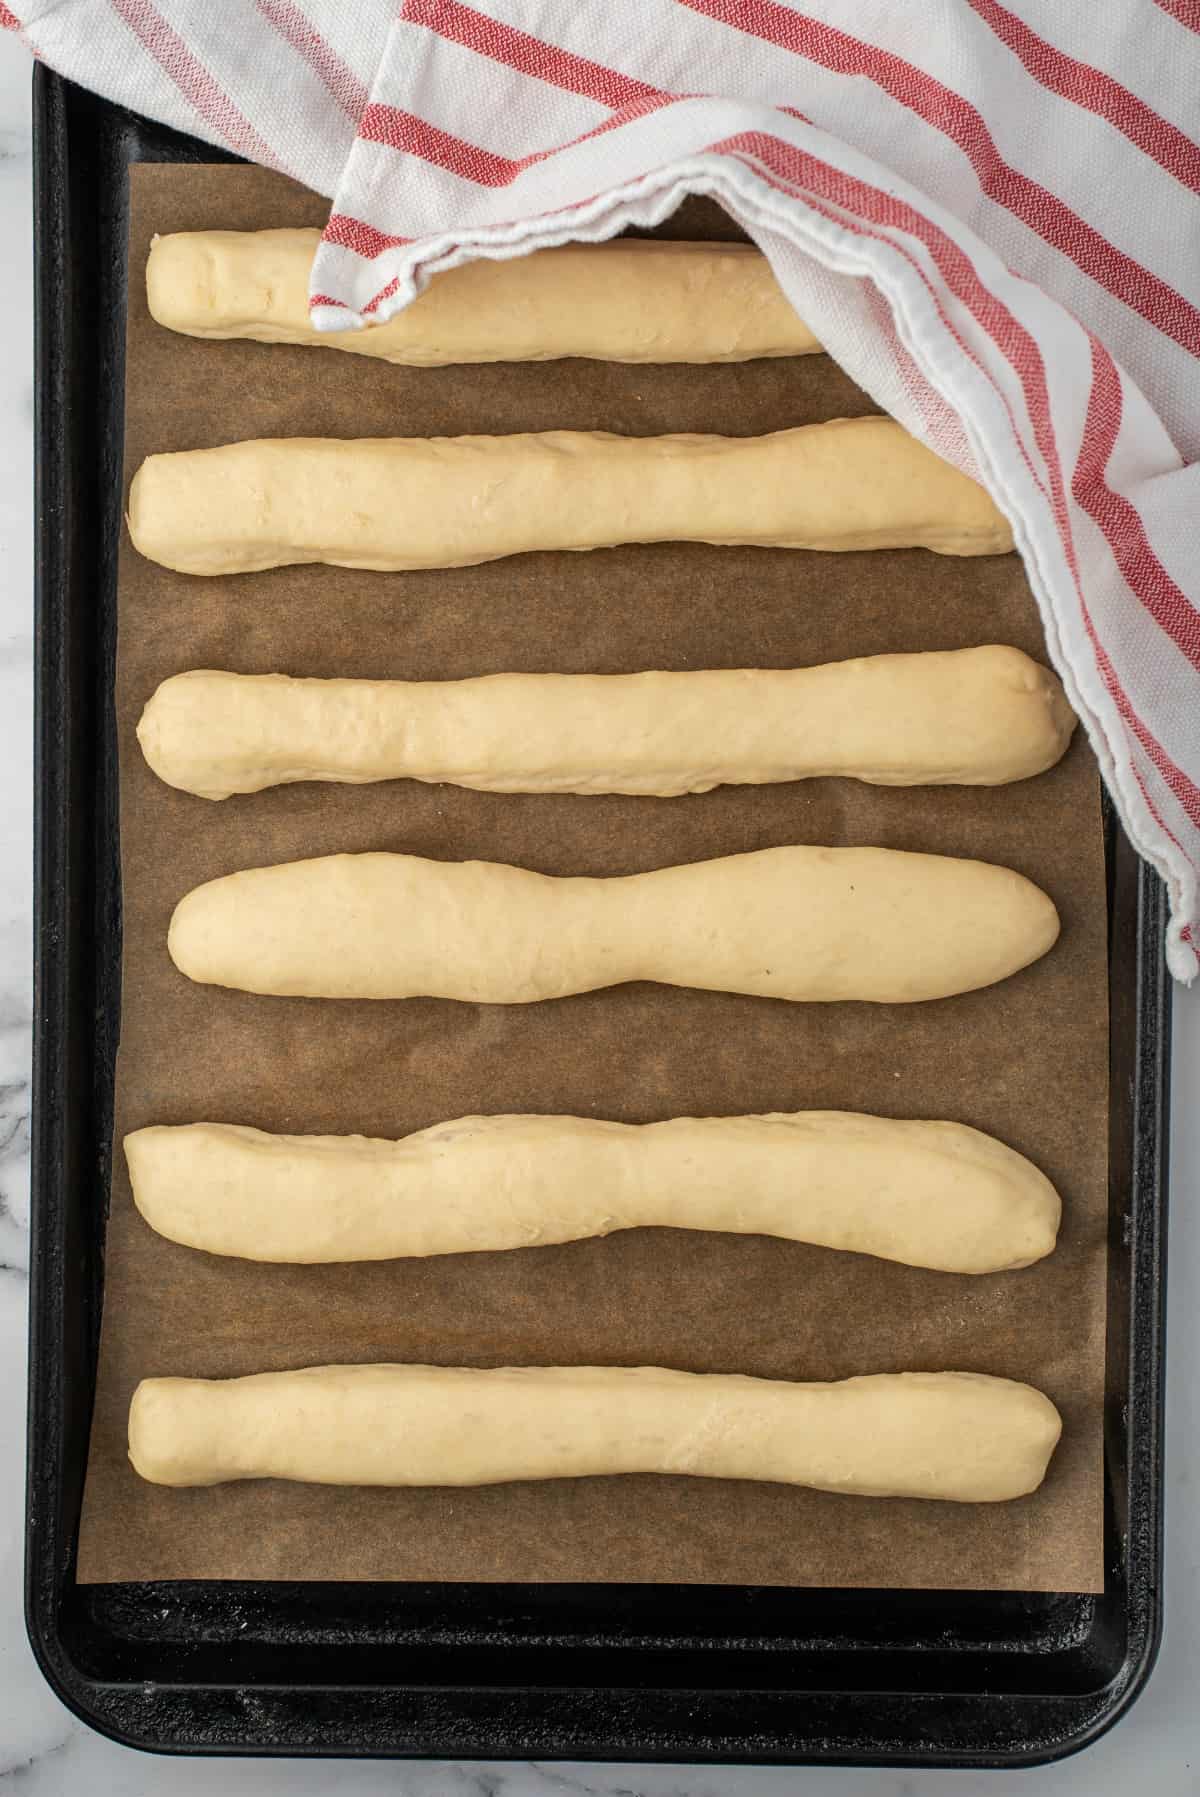 Dough shaped into breadsticks on a baking sheet prior to baking.